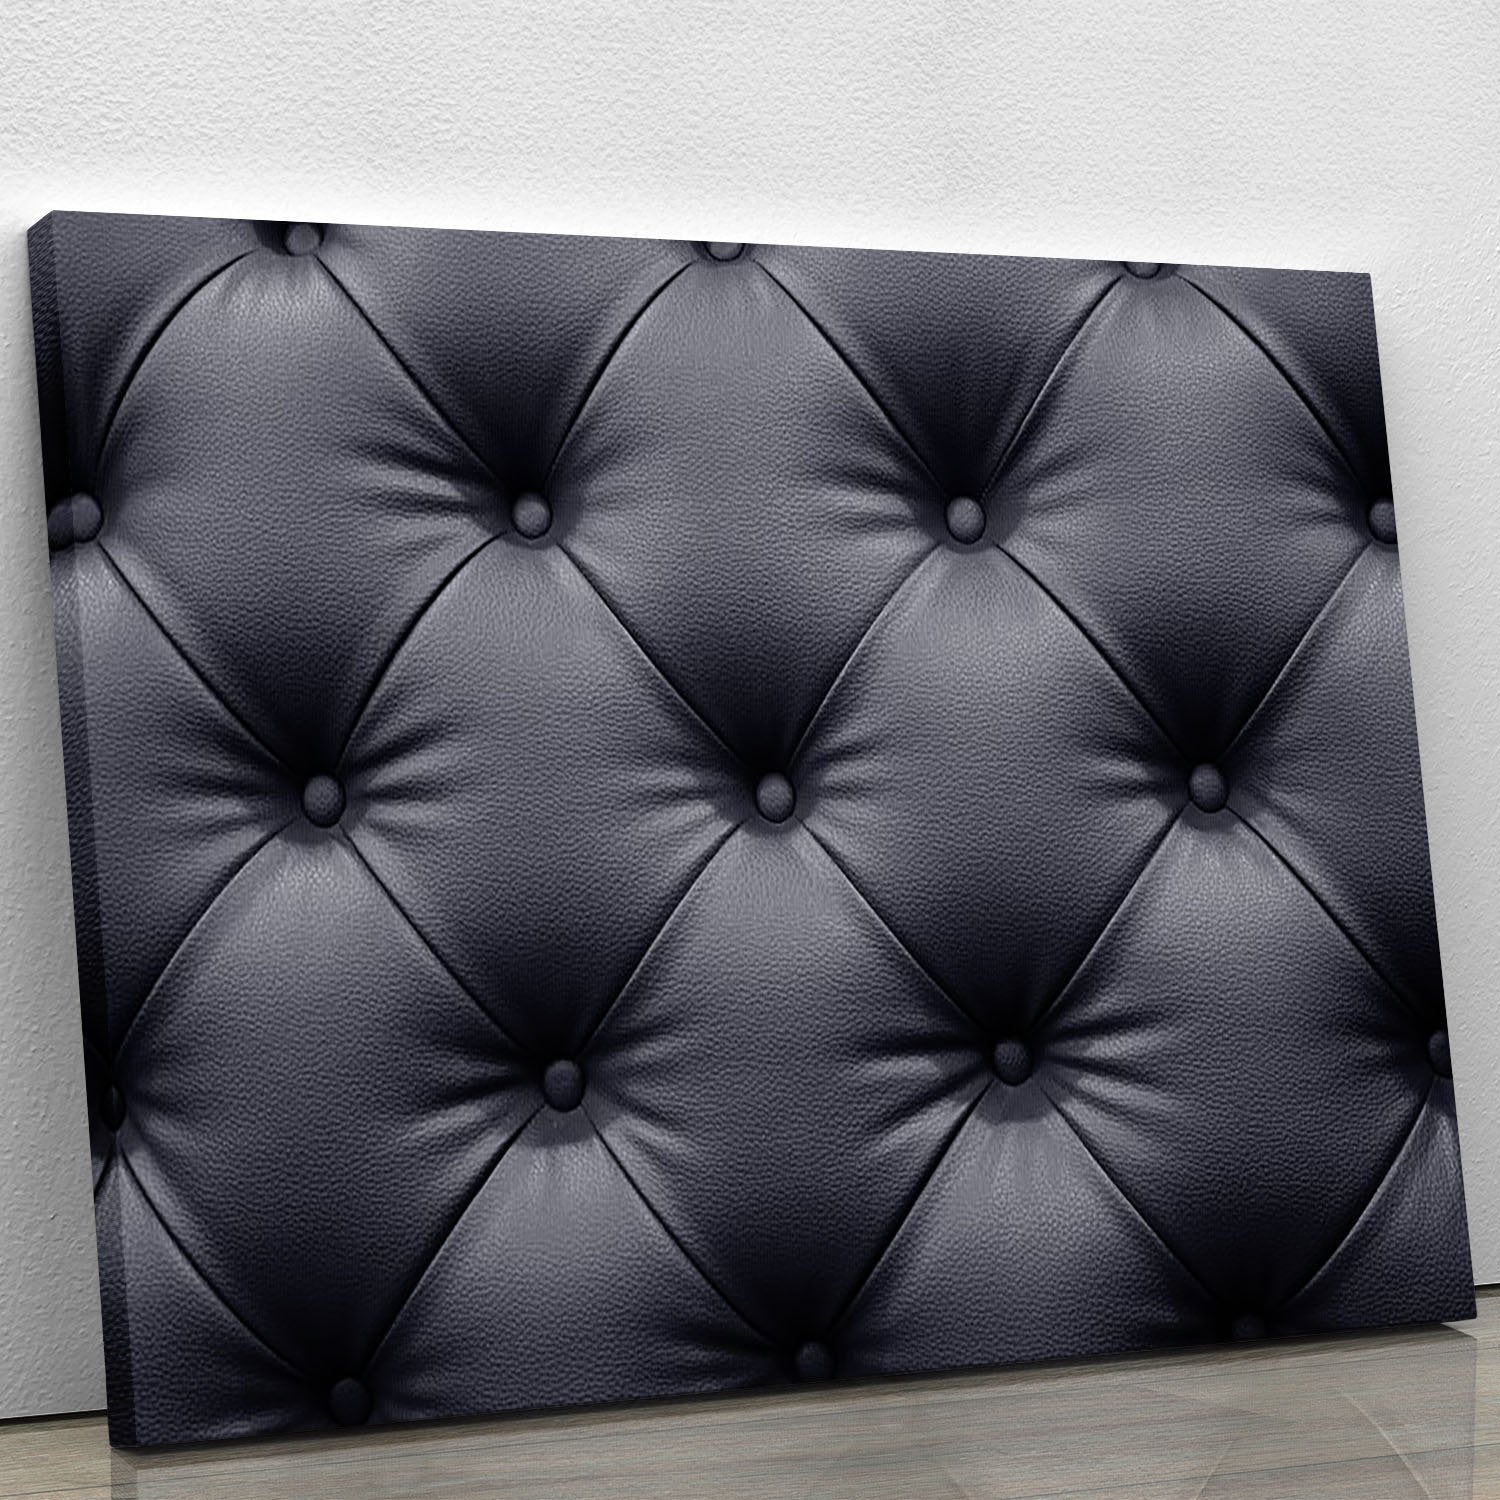 Black leather sofa texture Canvas Print or Poster